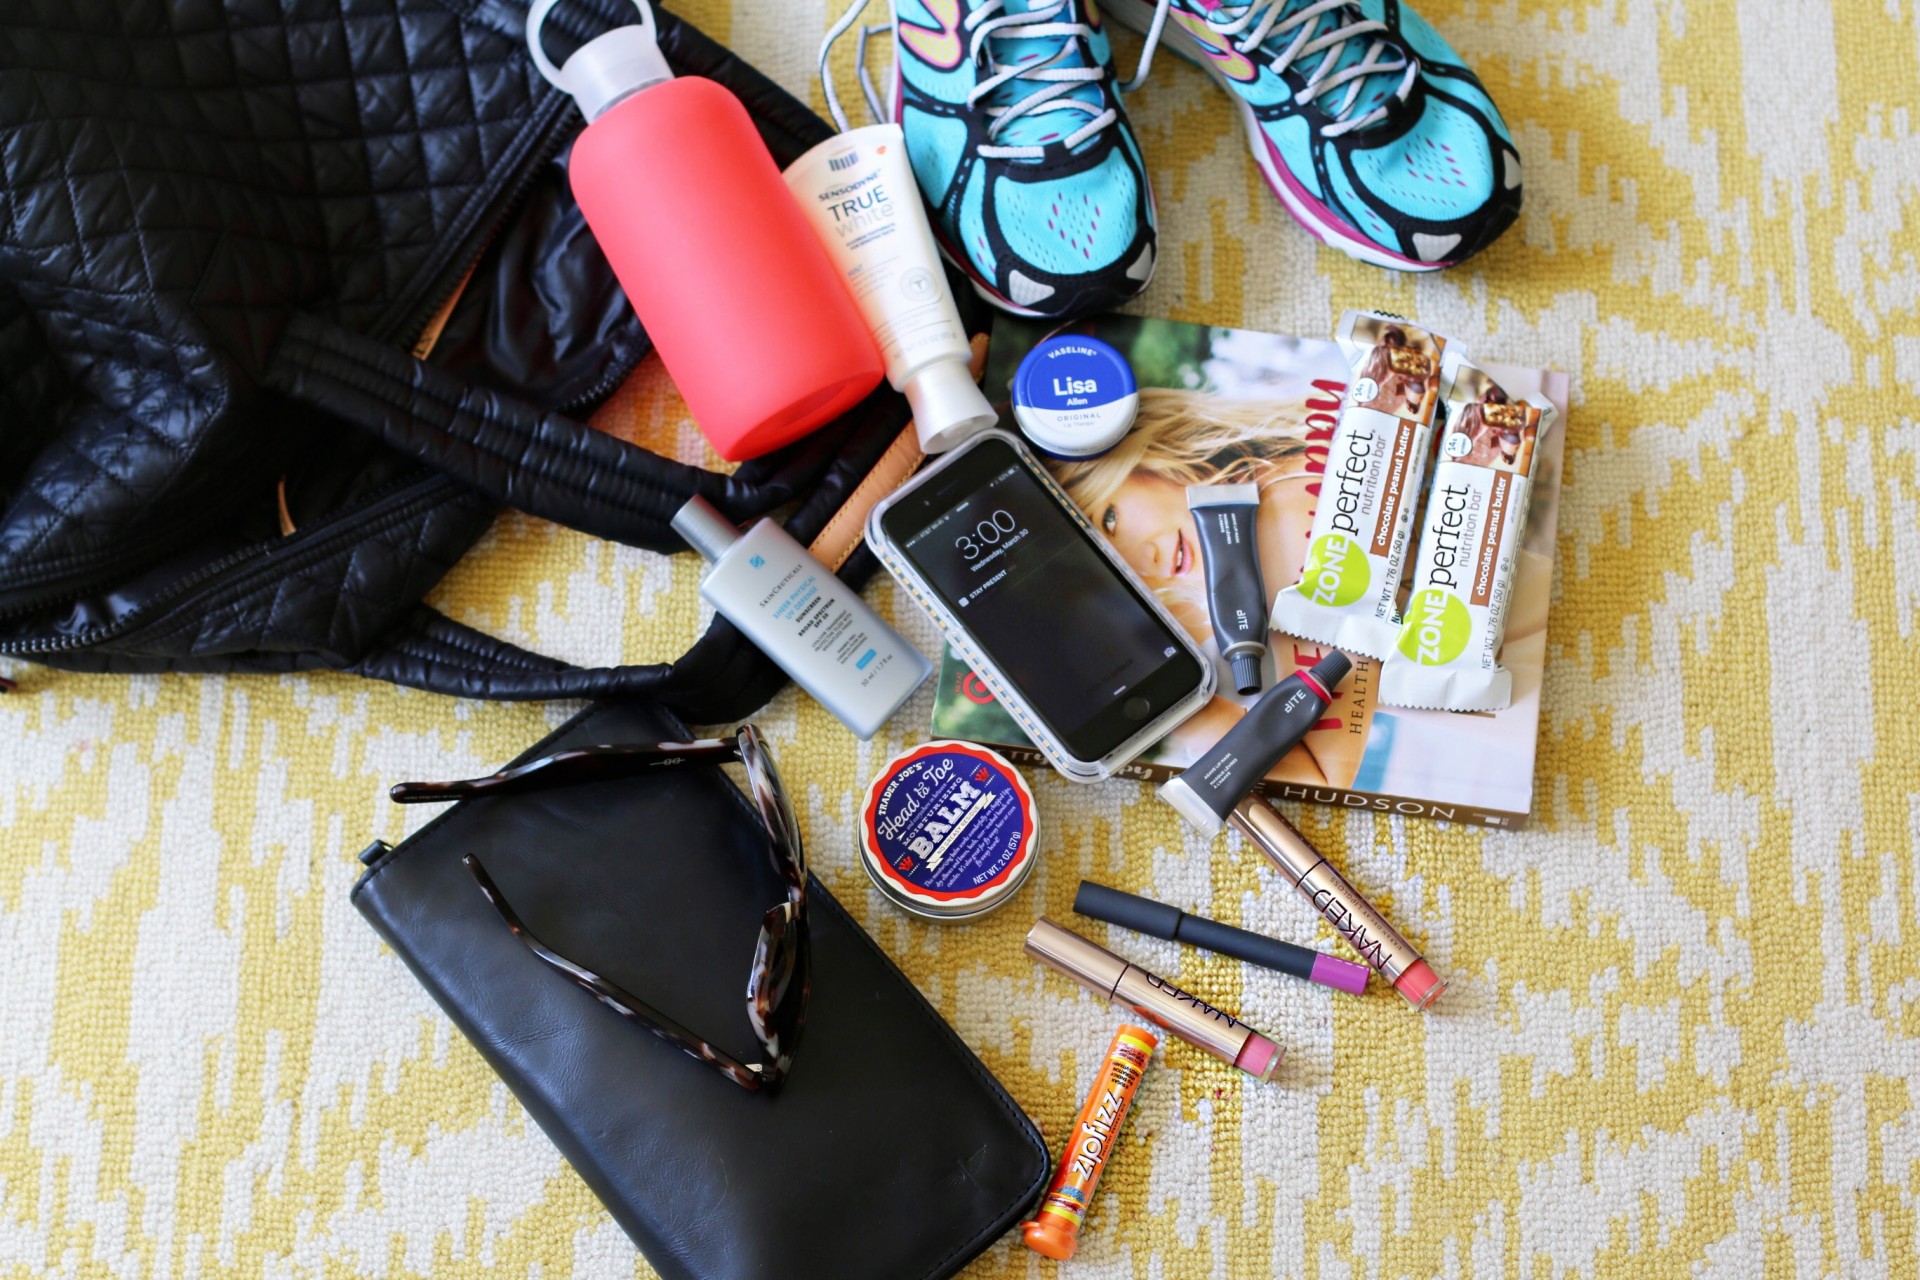 Post for She Knows, what's in my bag?